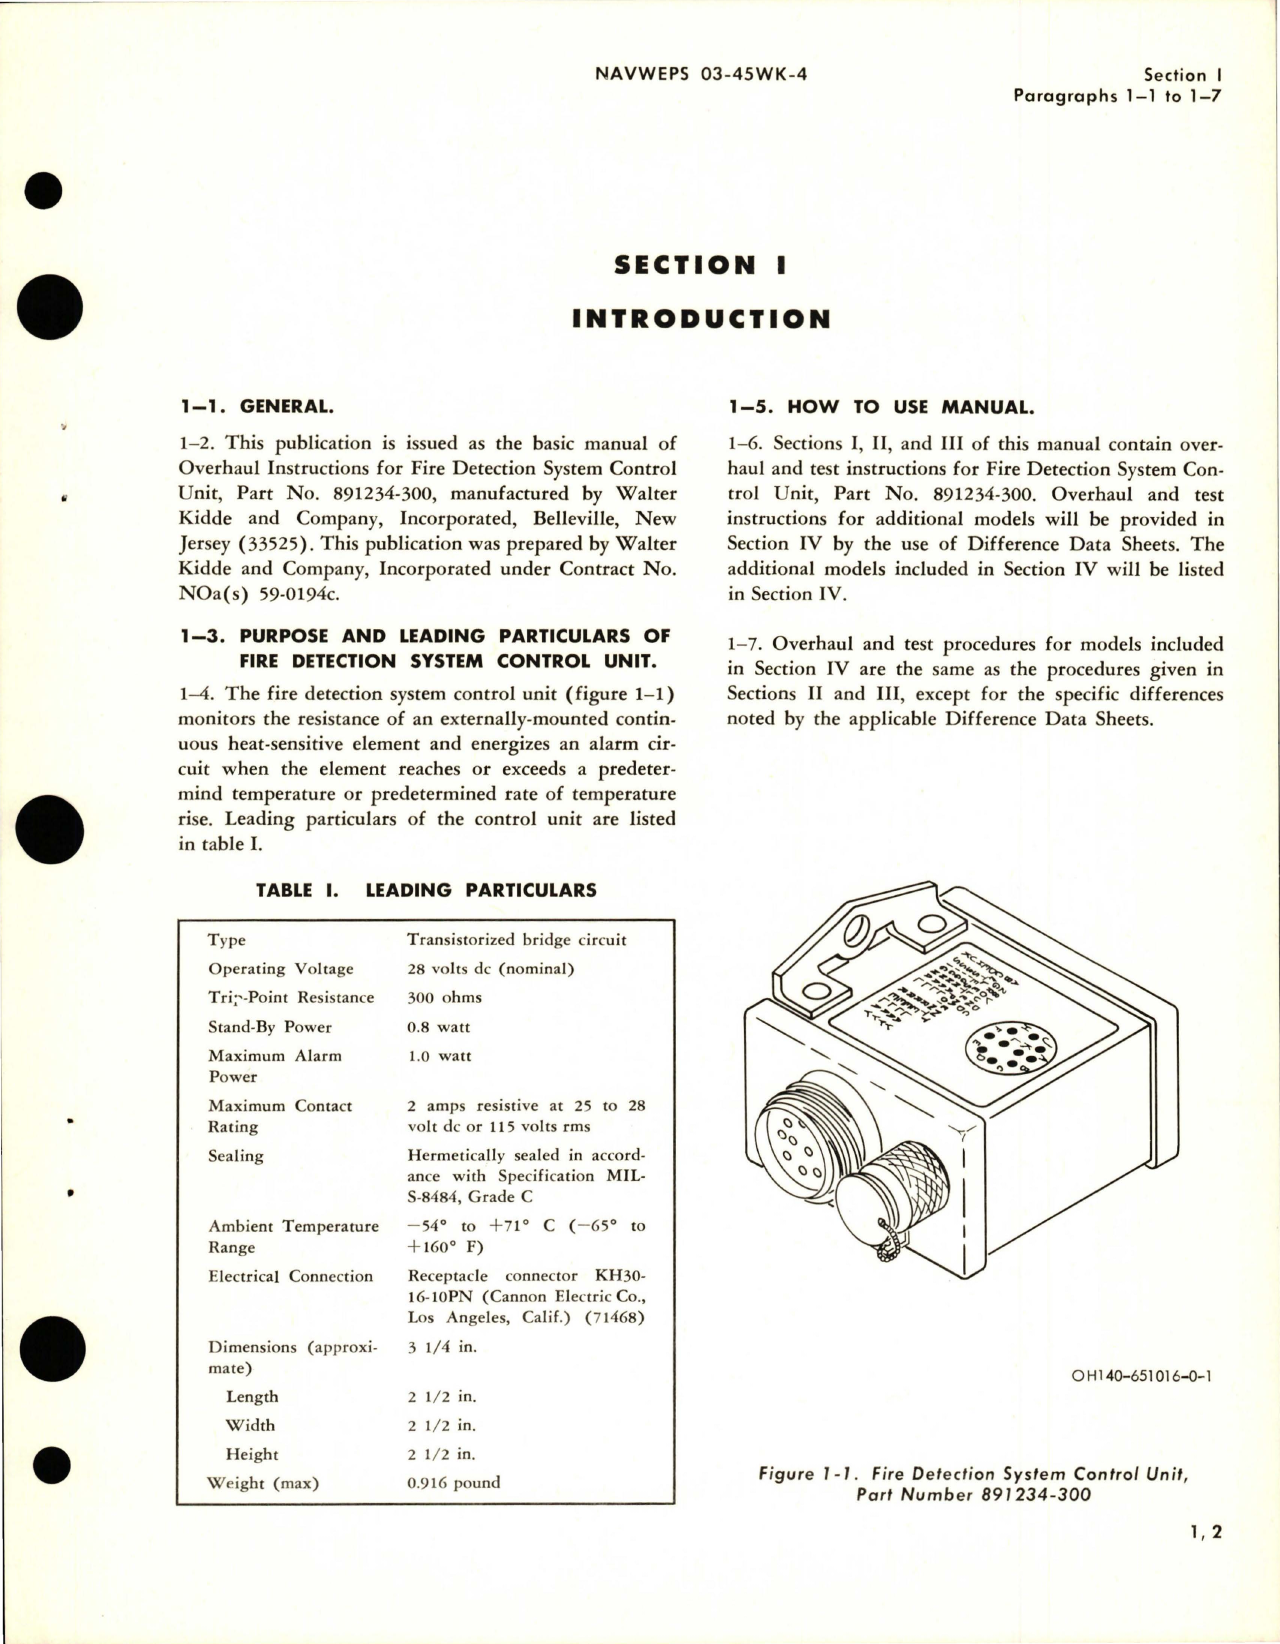 Sample page 5 from AirCorps Library document: Overhaul Instructions for Fire Detection System Control Unit - Part 891234-300